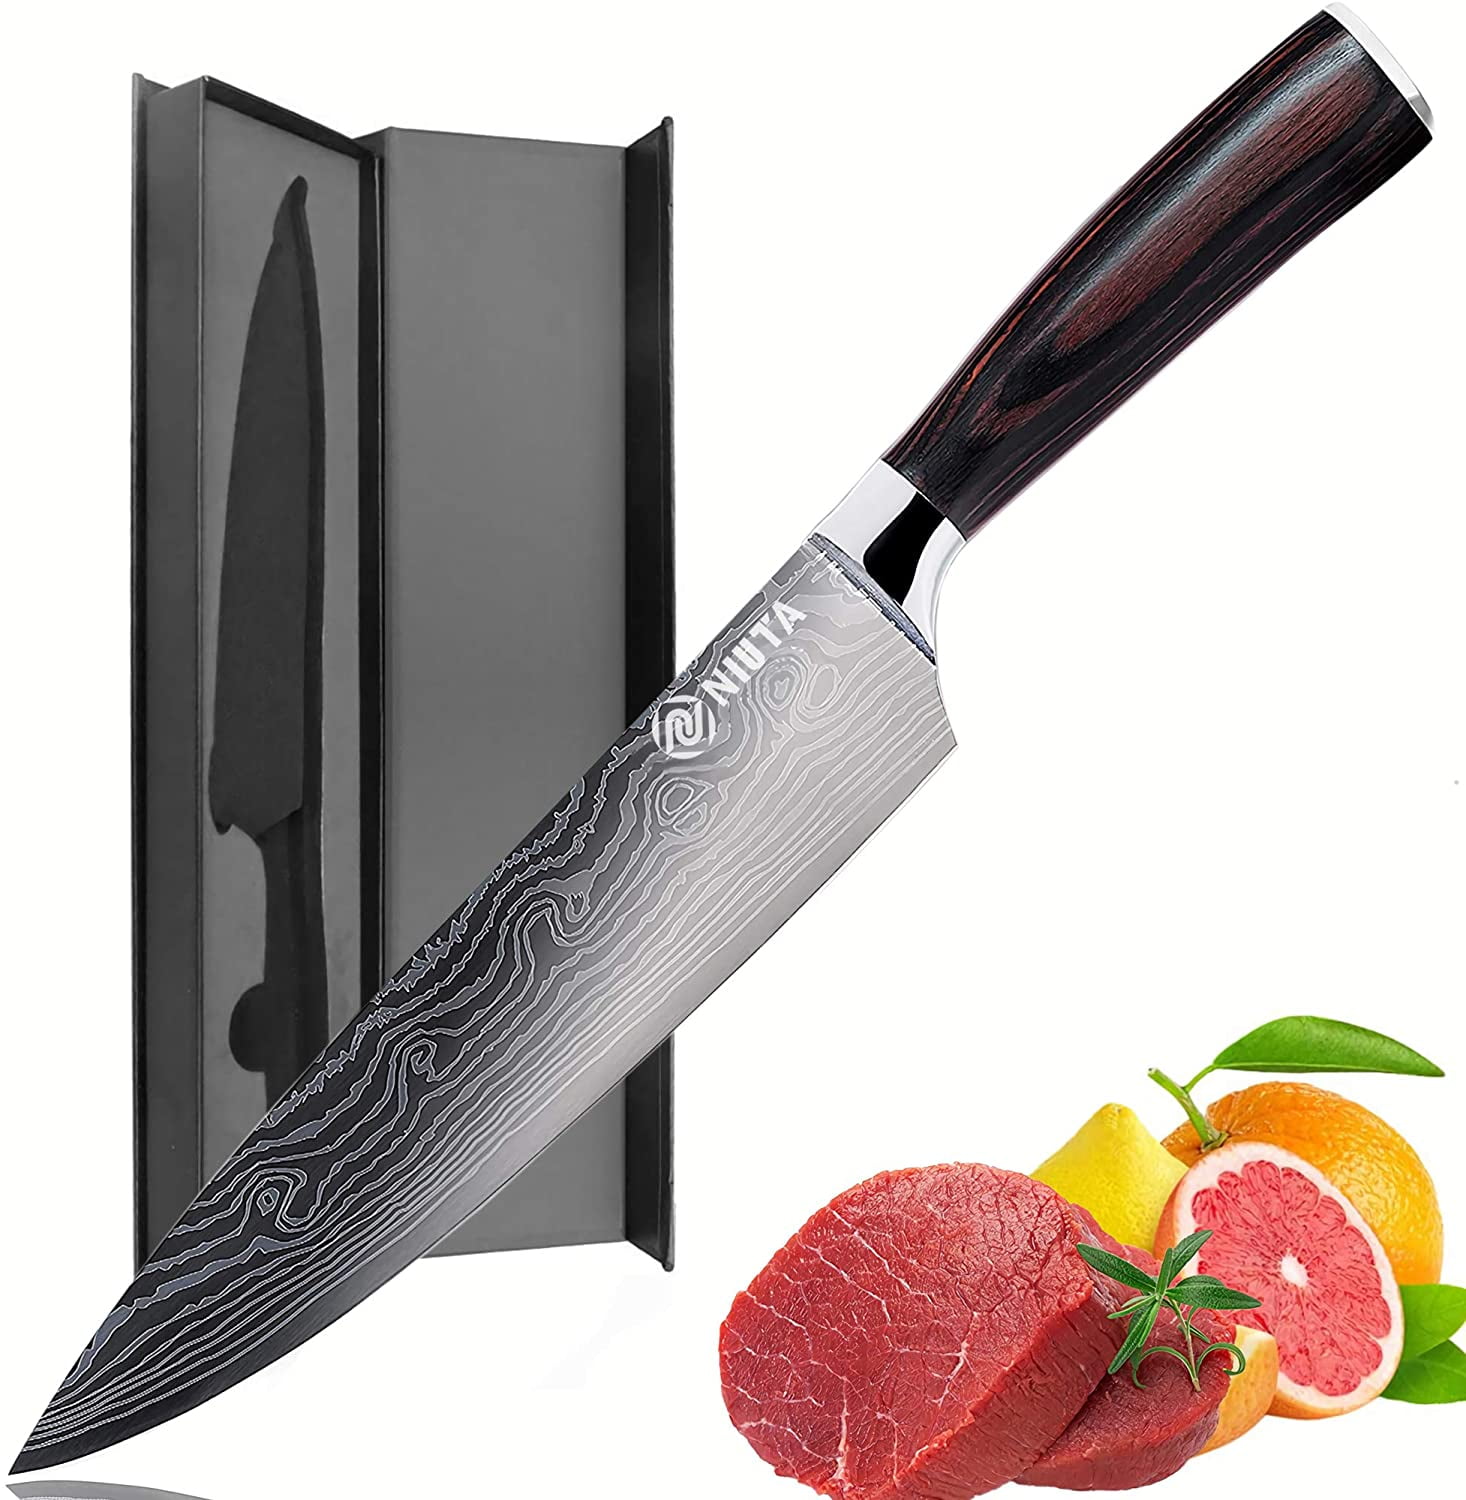 Astercook Chef Knife 8 Inch,German High Carbon Stainless Steel Ultra Sharp  Knife